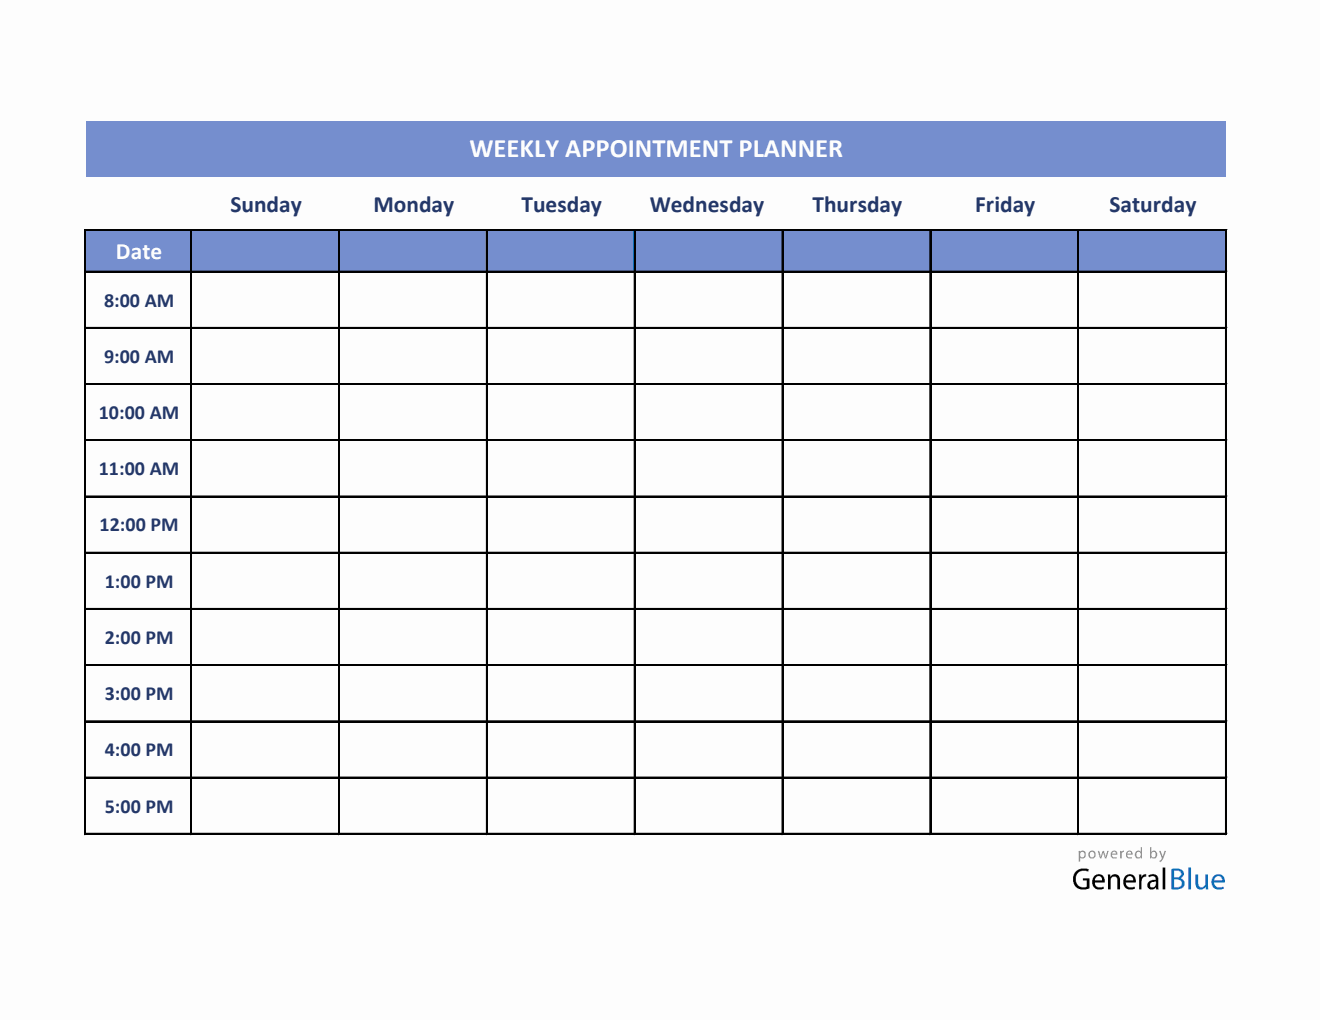 Weekly Appointment Planner in PDF (Blue)